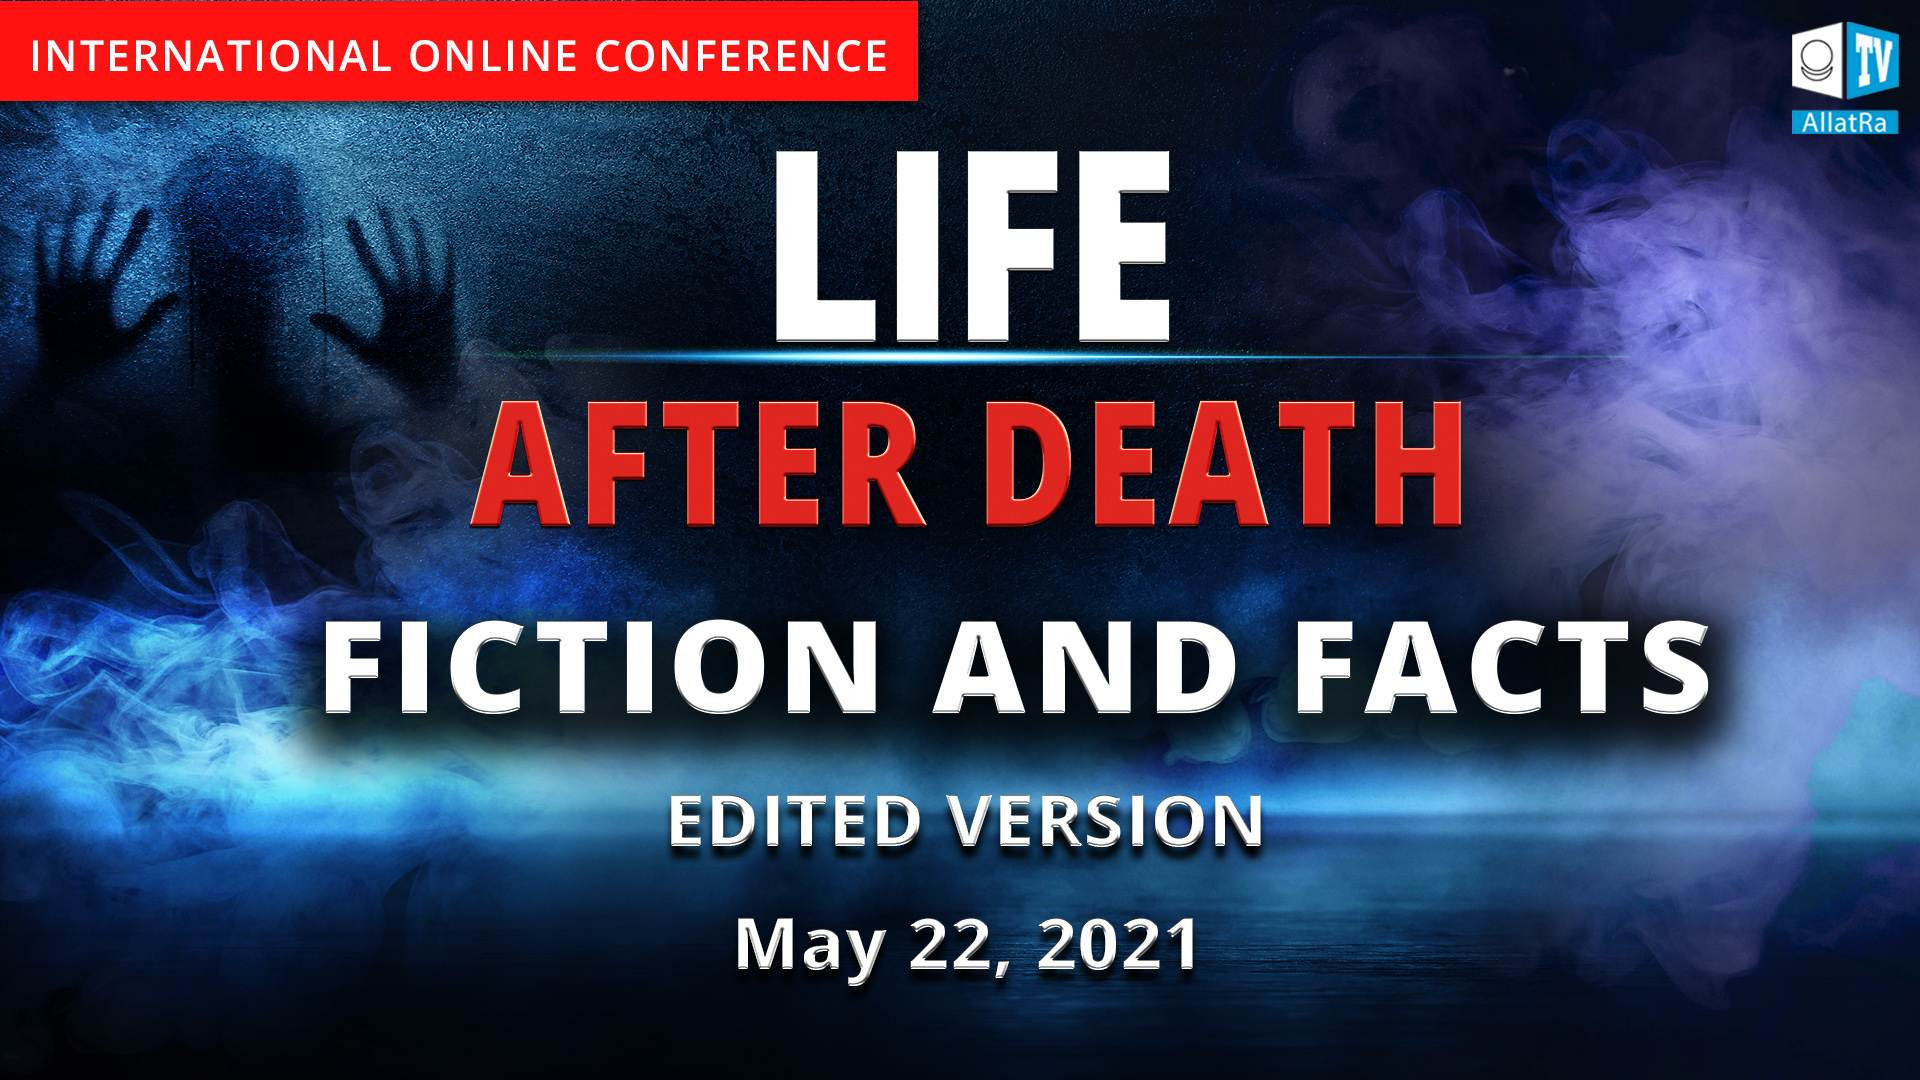 Life after Death. Fiction and Facts | International online conference | May 22, 2021 (Edited Version)